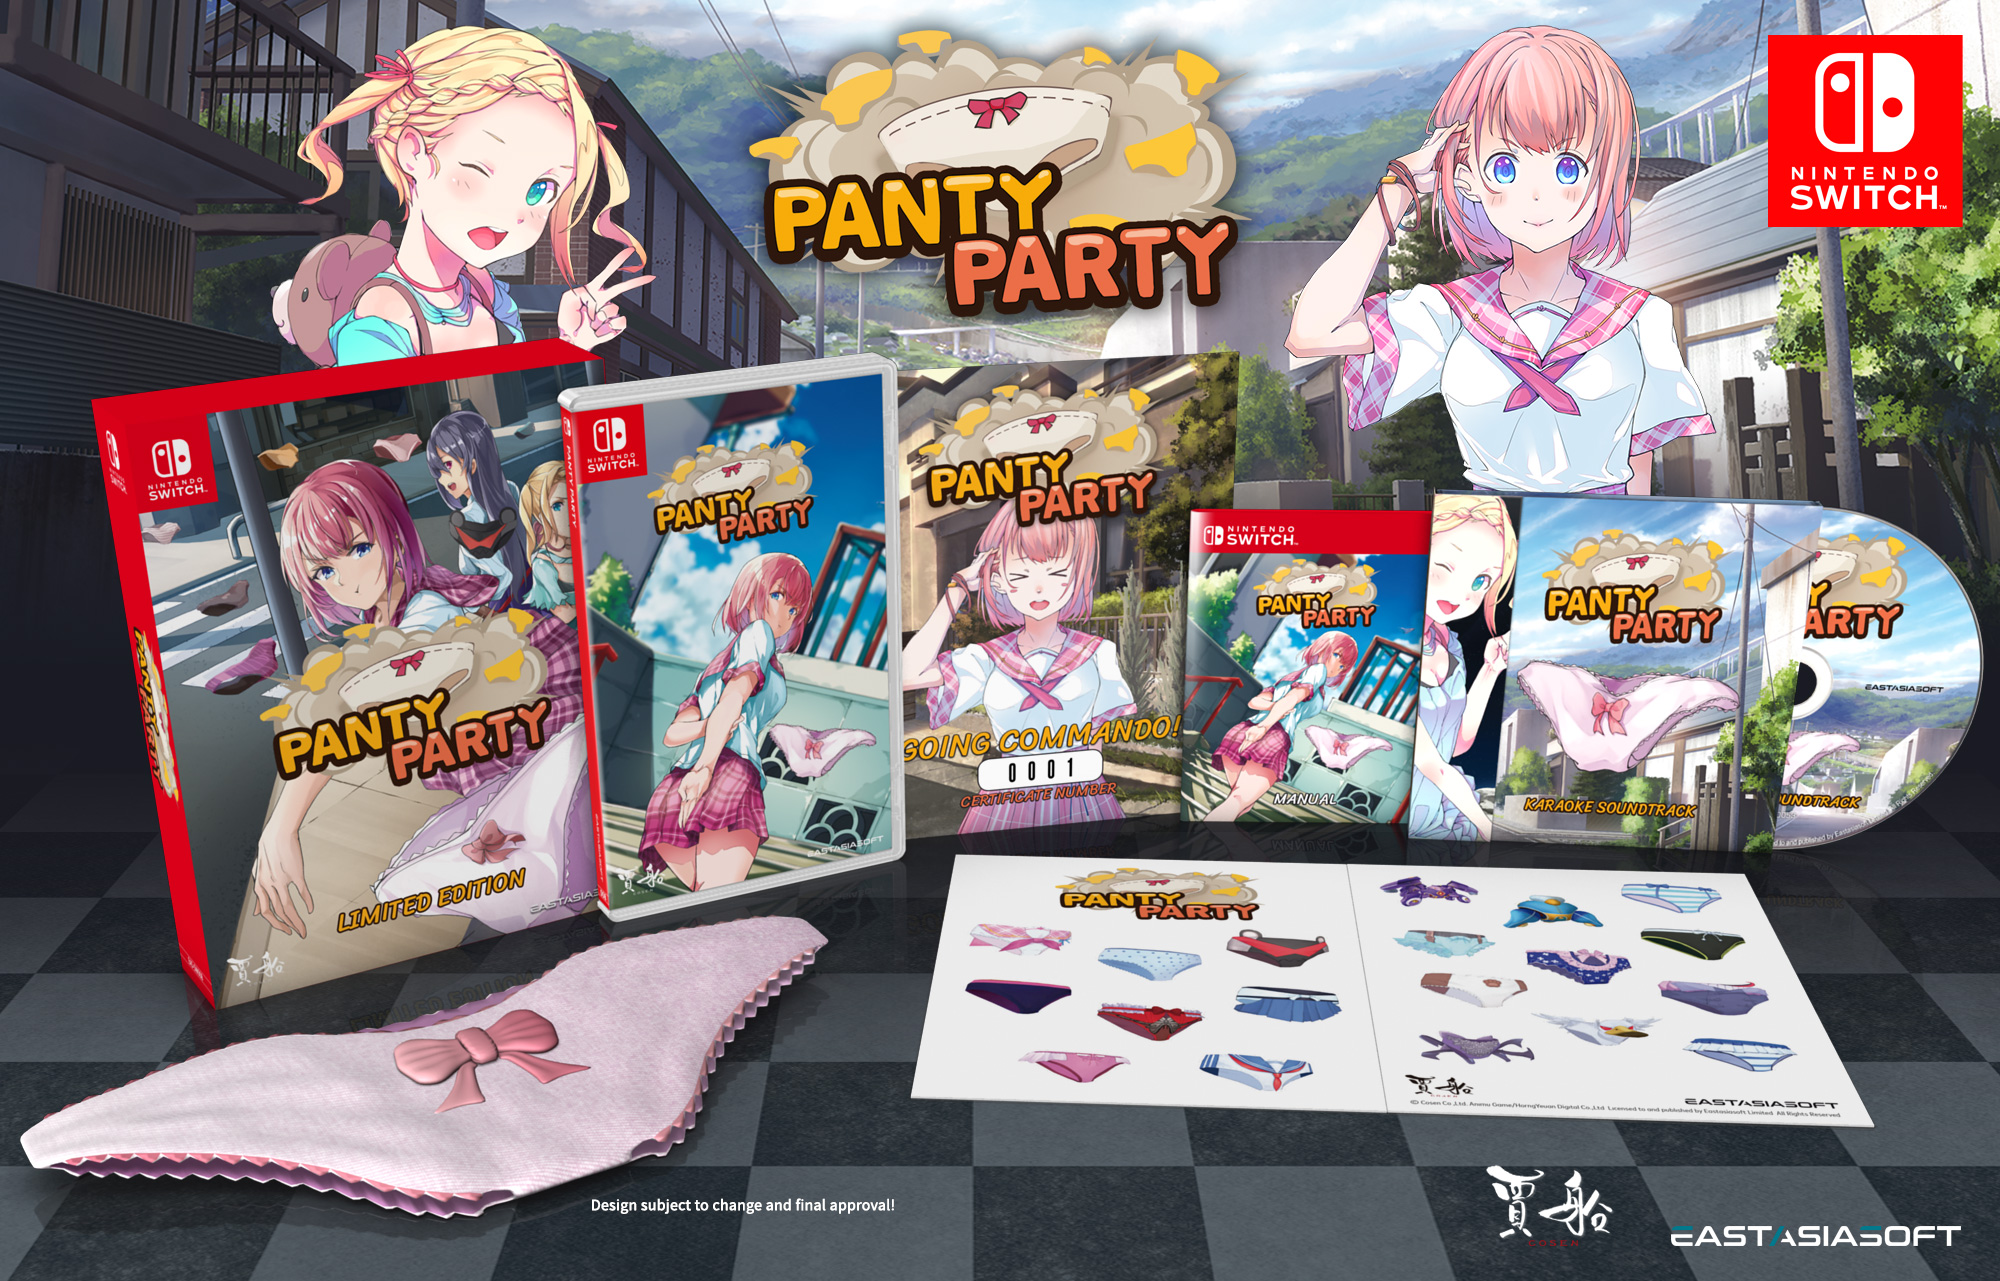 Limited Physical Edition Announced for Switch Version of Panty